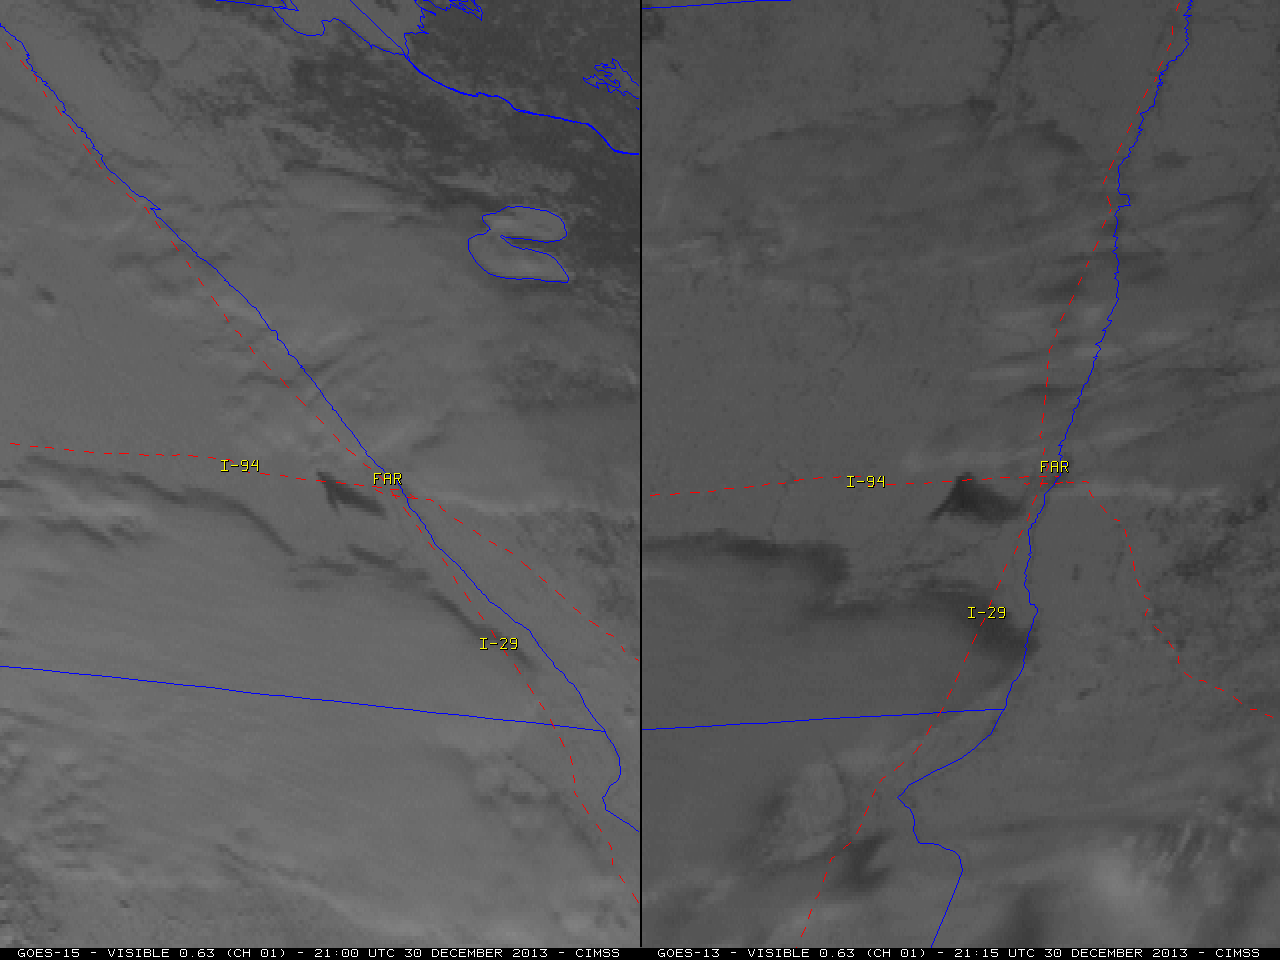 GOES-15 (left) vs GOES-13 (right) 0.63 µm visible channel images [click to play animation]